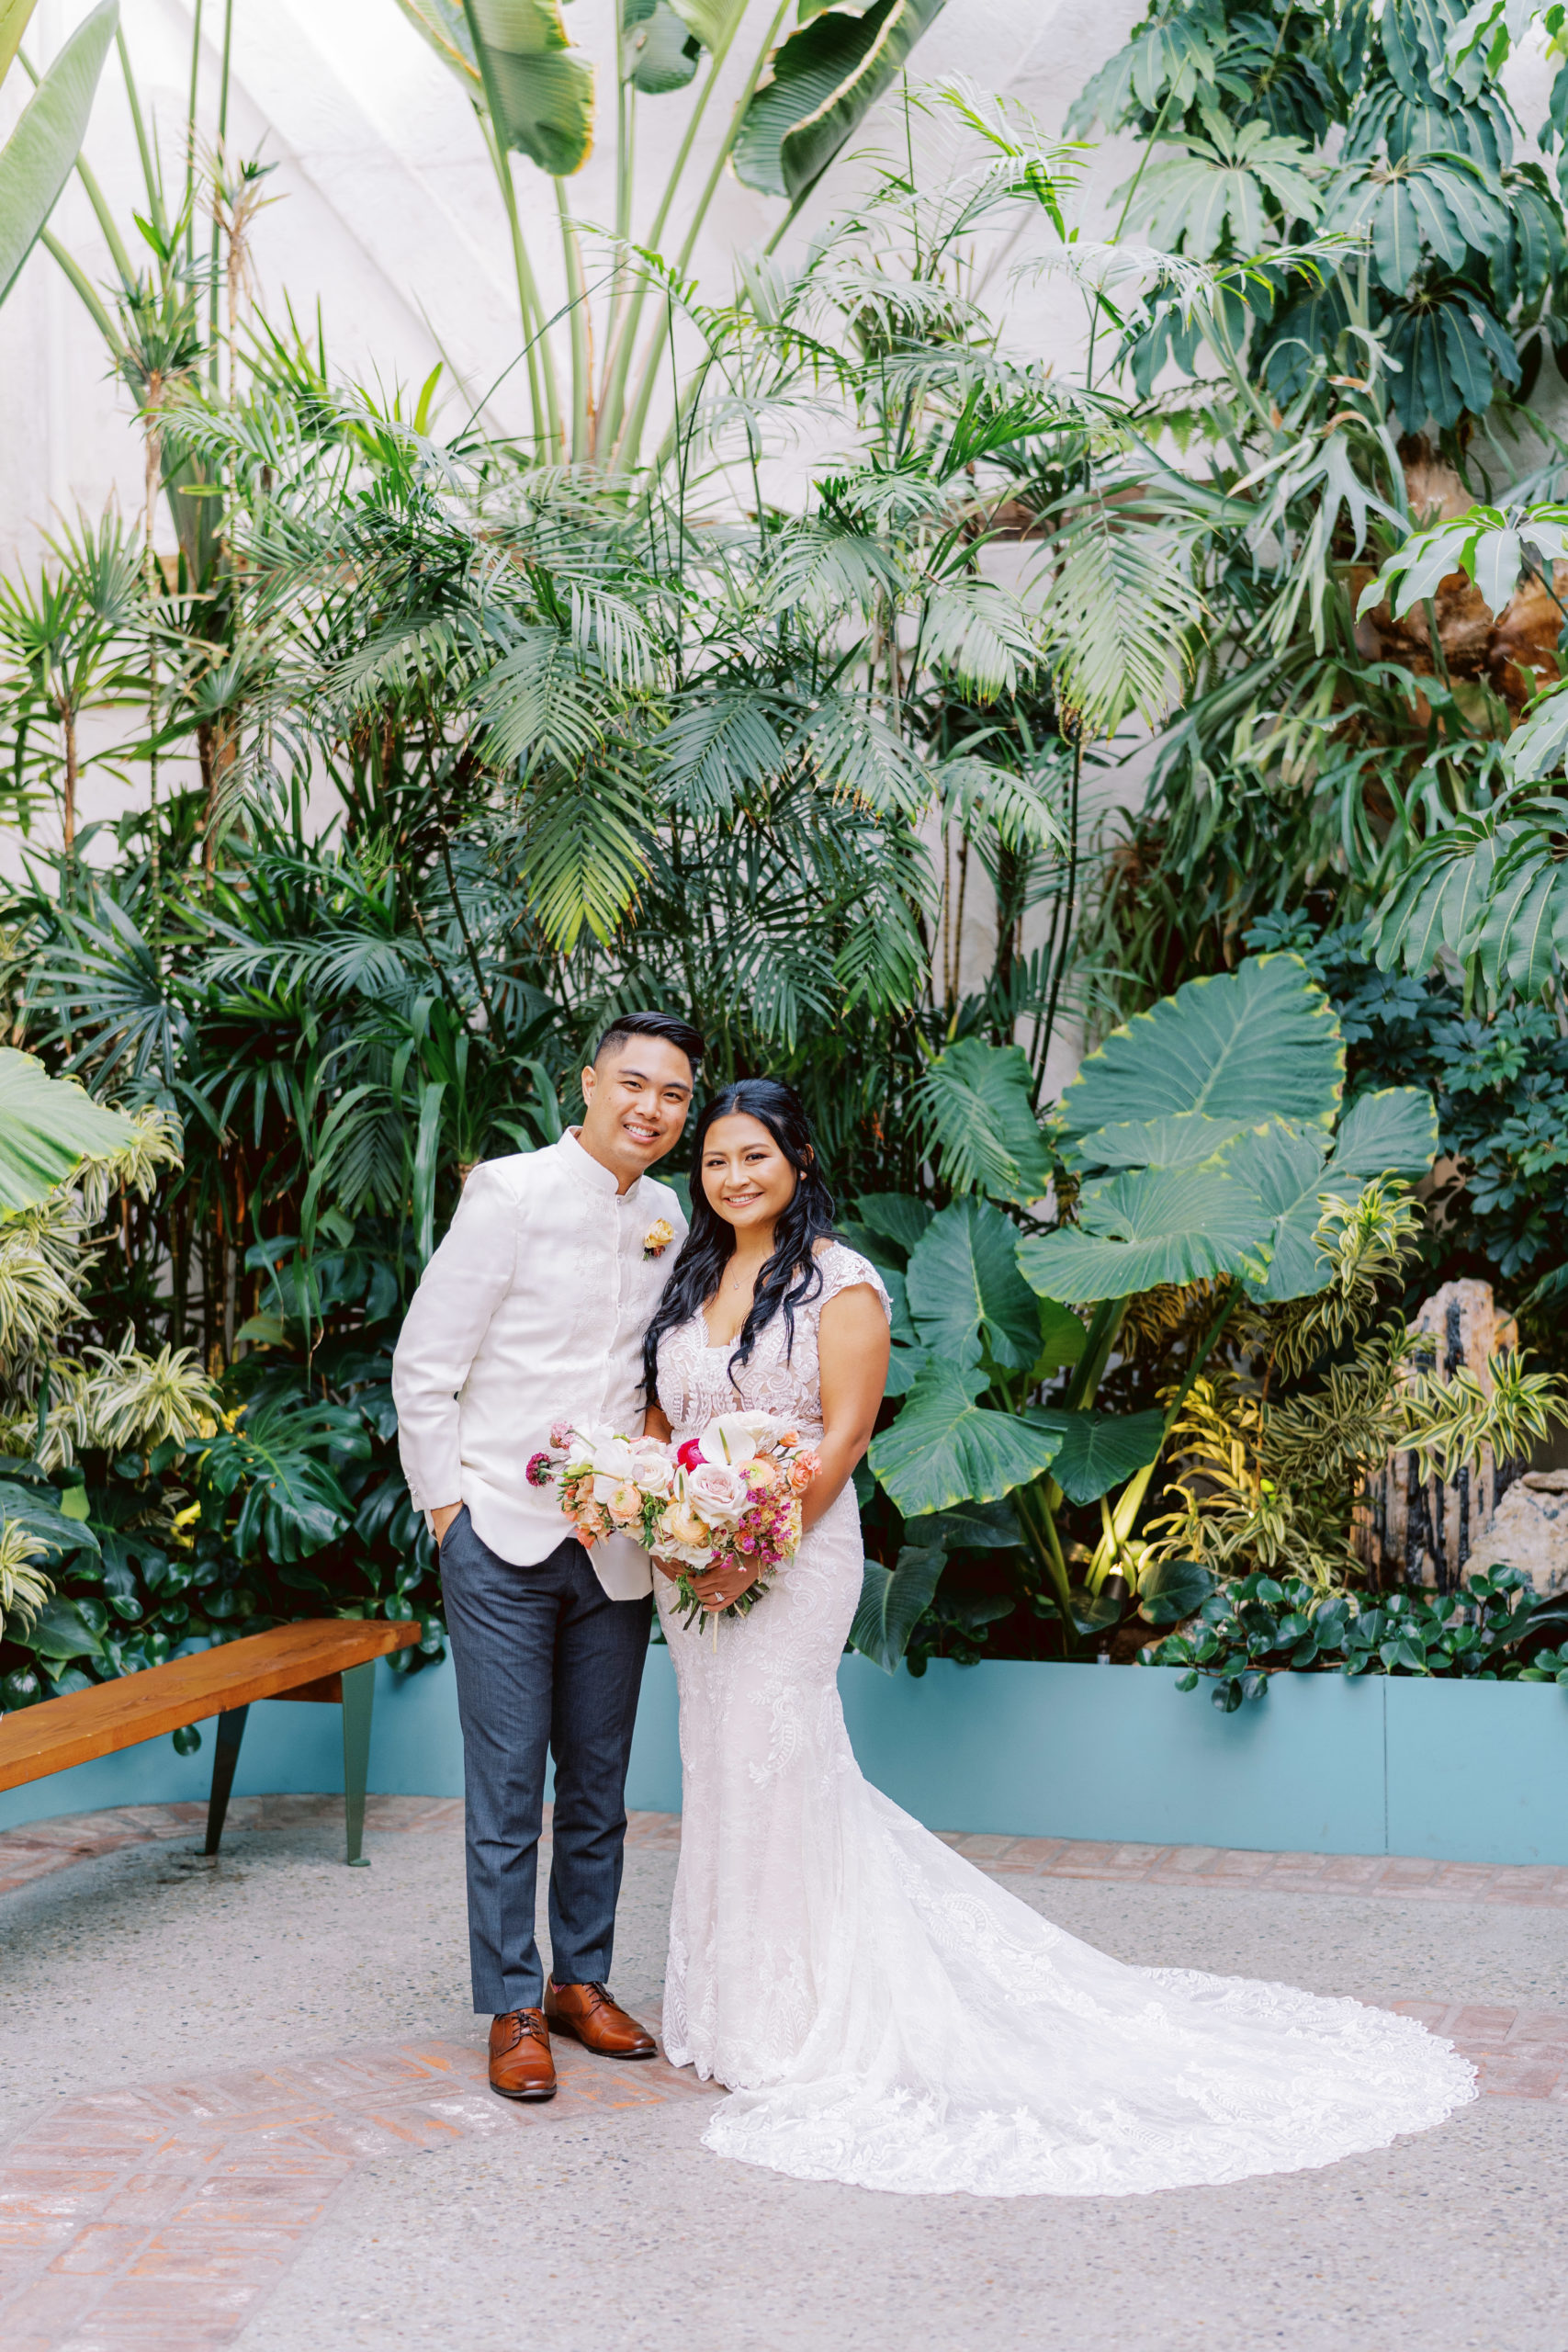 bride in lace dress with bright tropical bouquet poses with groom in white wedding attire during cocktail hour at The Valentine DTLA 